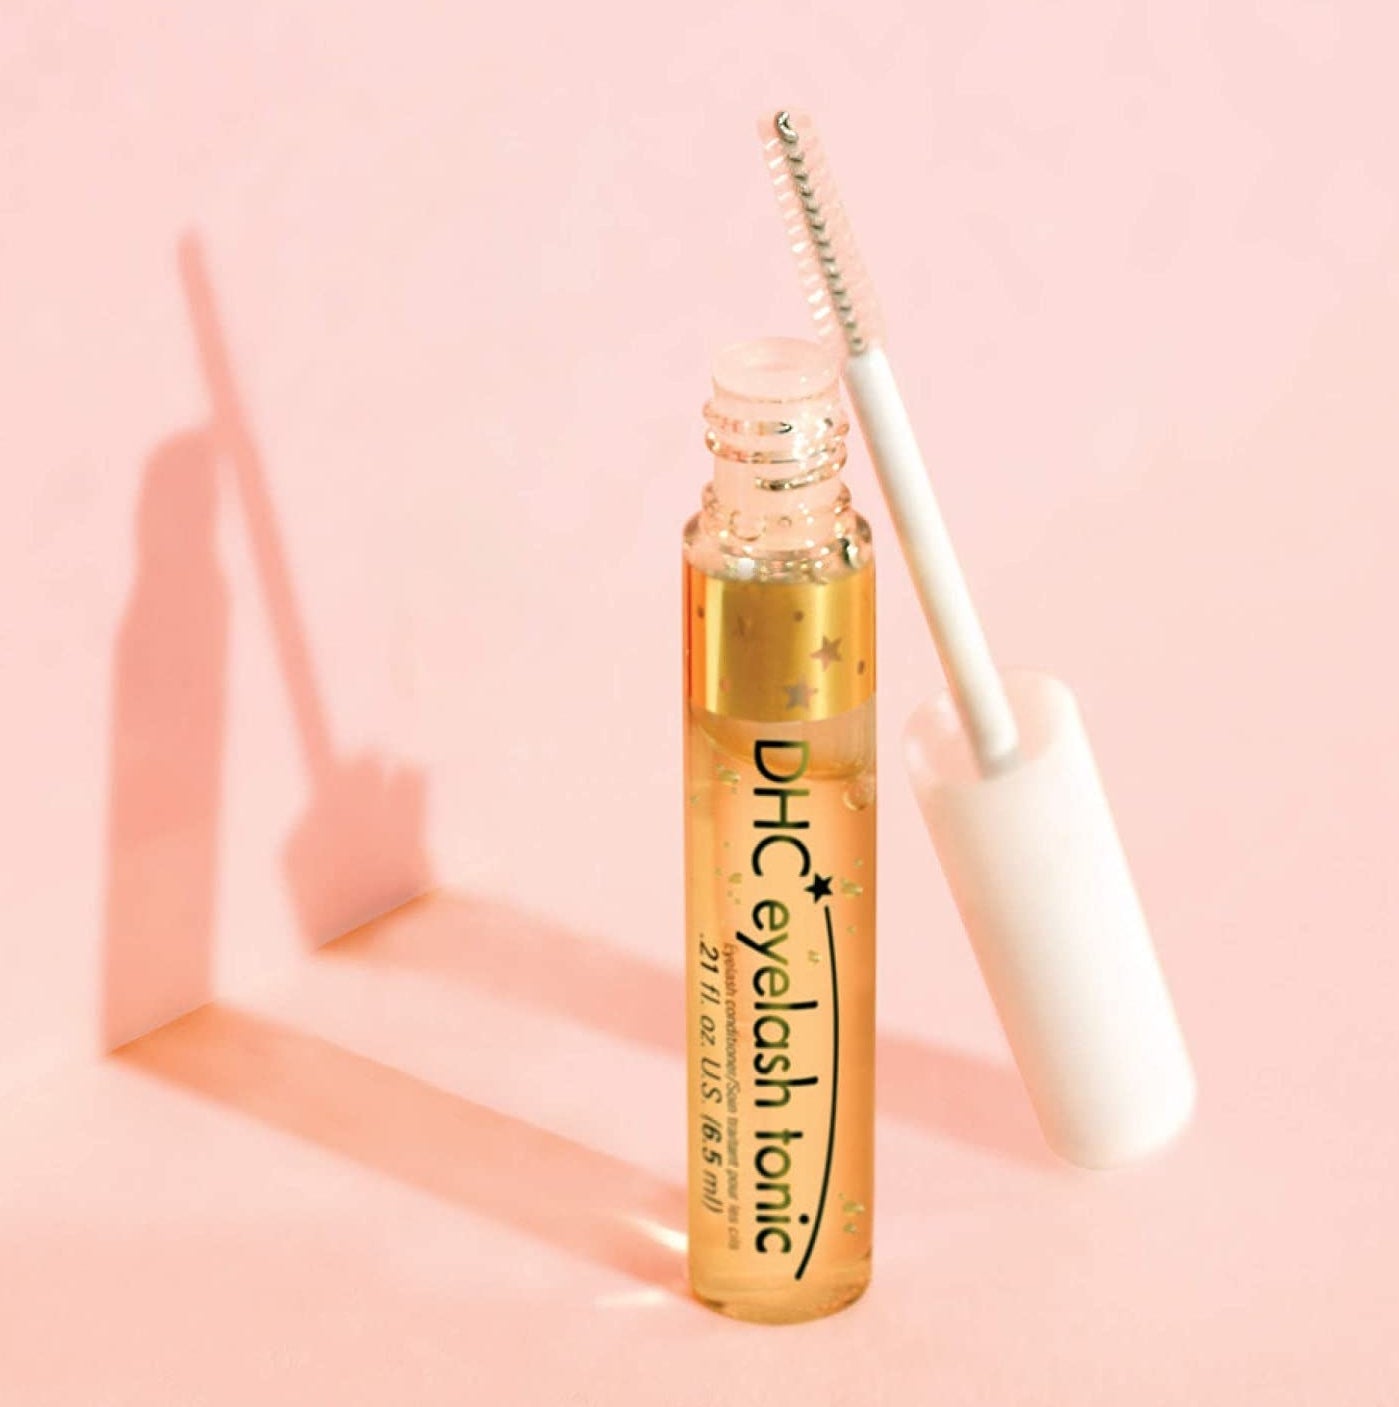 A tube of eyelash tonic with its wand leaning on its side